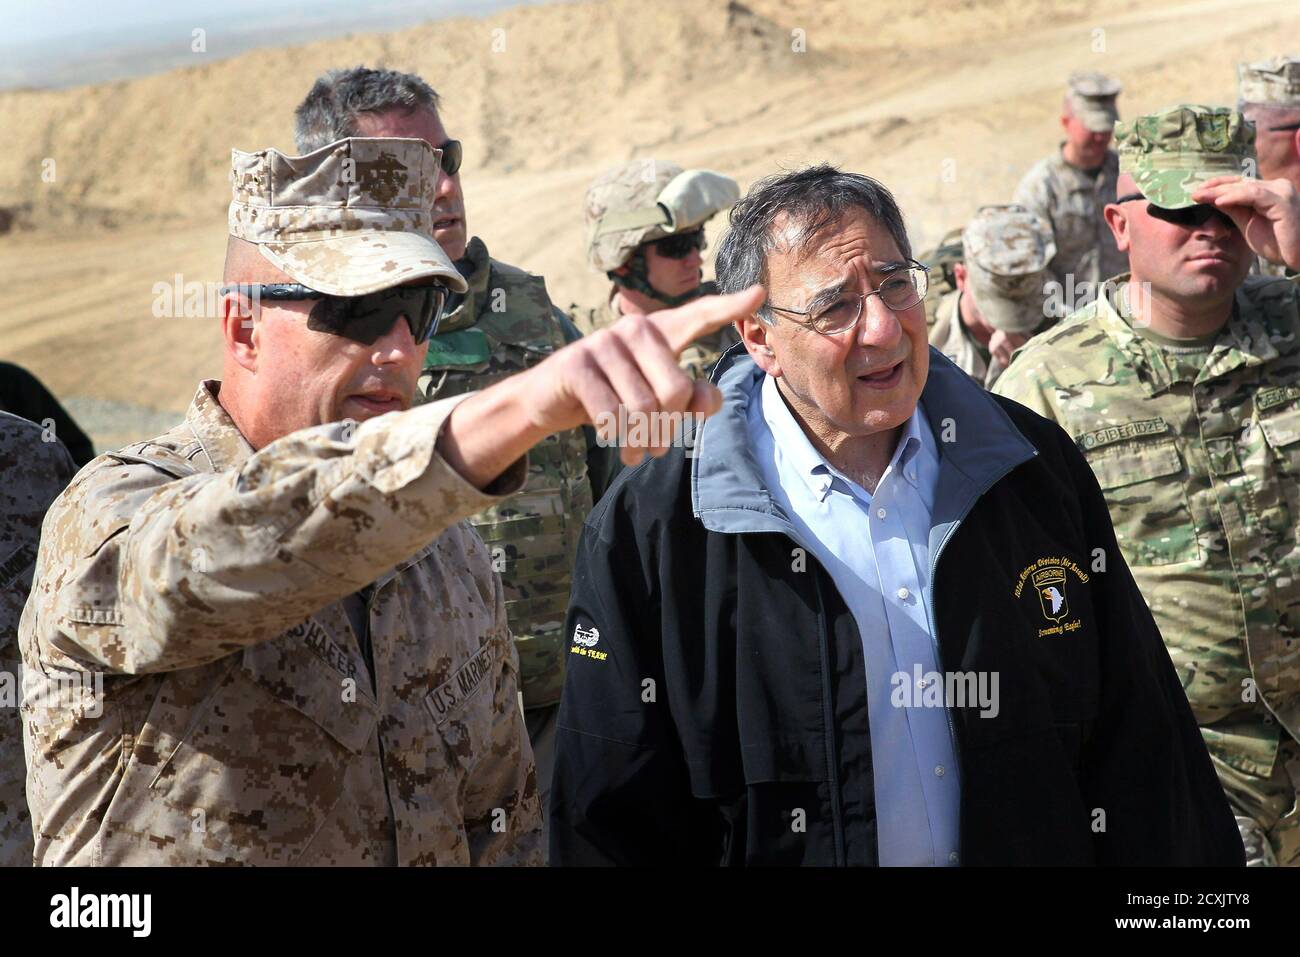 U.S. Defense Secretary Leon Panetta is greeted by Col. John Shafer (L) with RTC 6 after arriving to greet troops at Forward Operating Base Shukvani, Afghanistan March 14, 2012. Panetta told troops in Afghanistan on Wednesday that the massacre of 16 Afghan civilians by an American soldier should not deter them from their mission to secure the country ahead of a 2014 NATO withdrawal deadline. REUTERS/Scott Olson/Pool (AFGHANISTAN - Tags: POLITICS MILITARY) Stock Photo